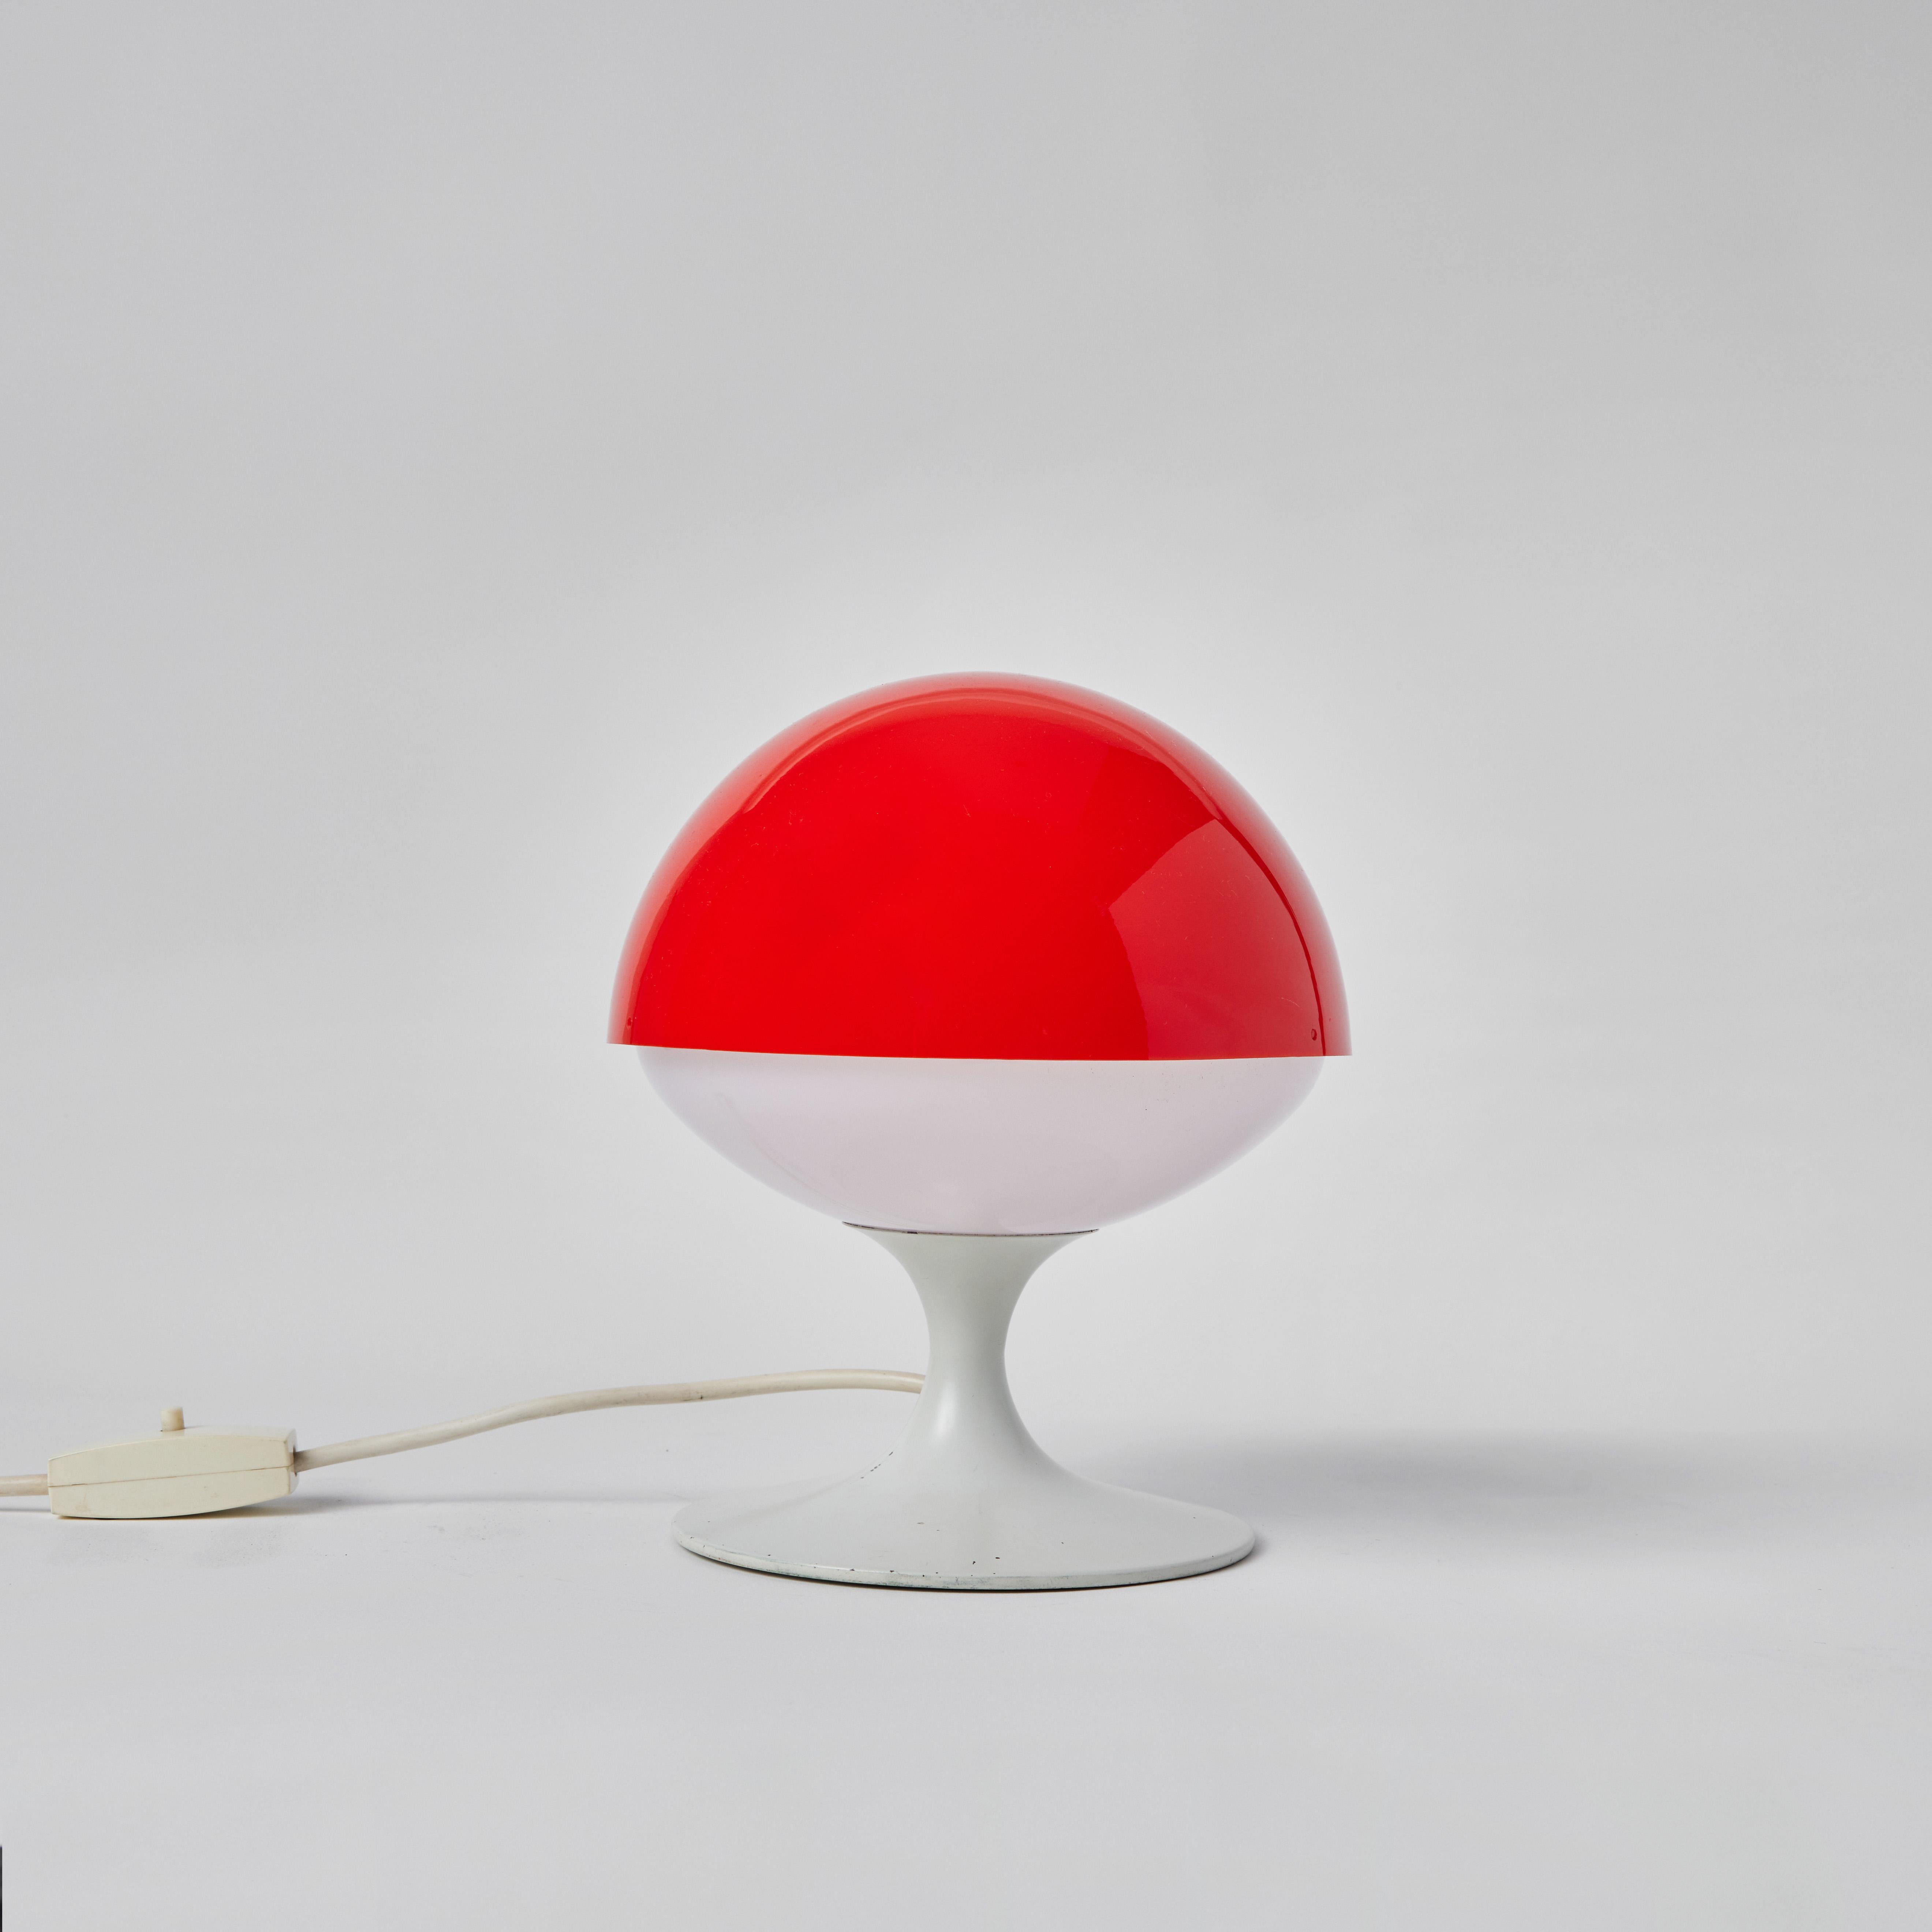 Pair of 1960s Max Bill Red & White Table Lamps for Temde Leuchten, Switzerland For Sale 1